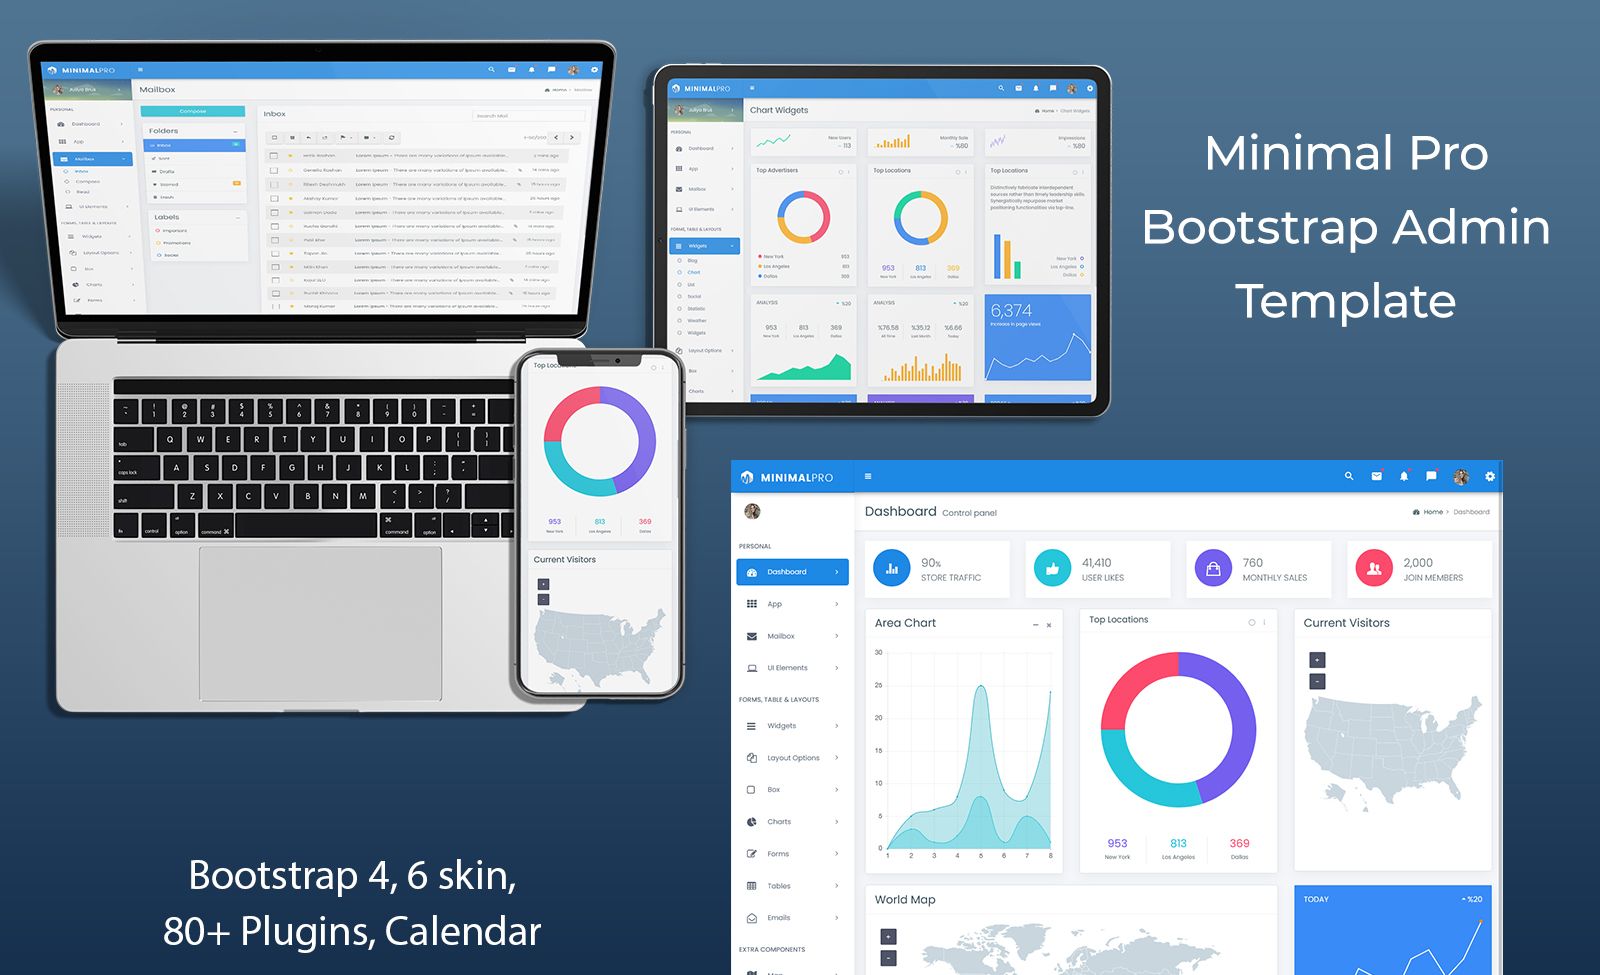 The Ultimate Bootstrap Admin Templates With Dashboard UI Kit Webapp – Minimal Pro